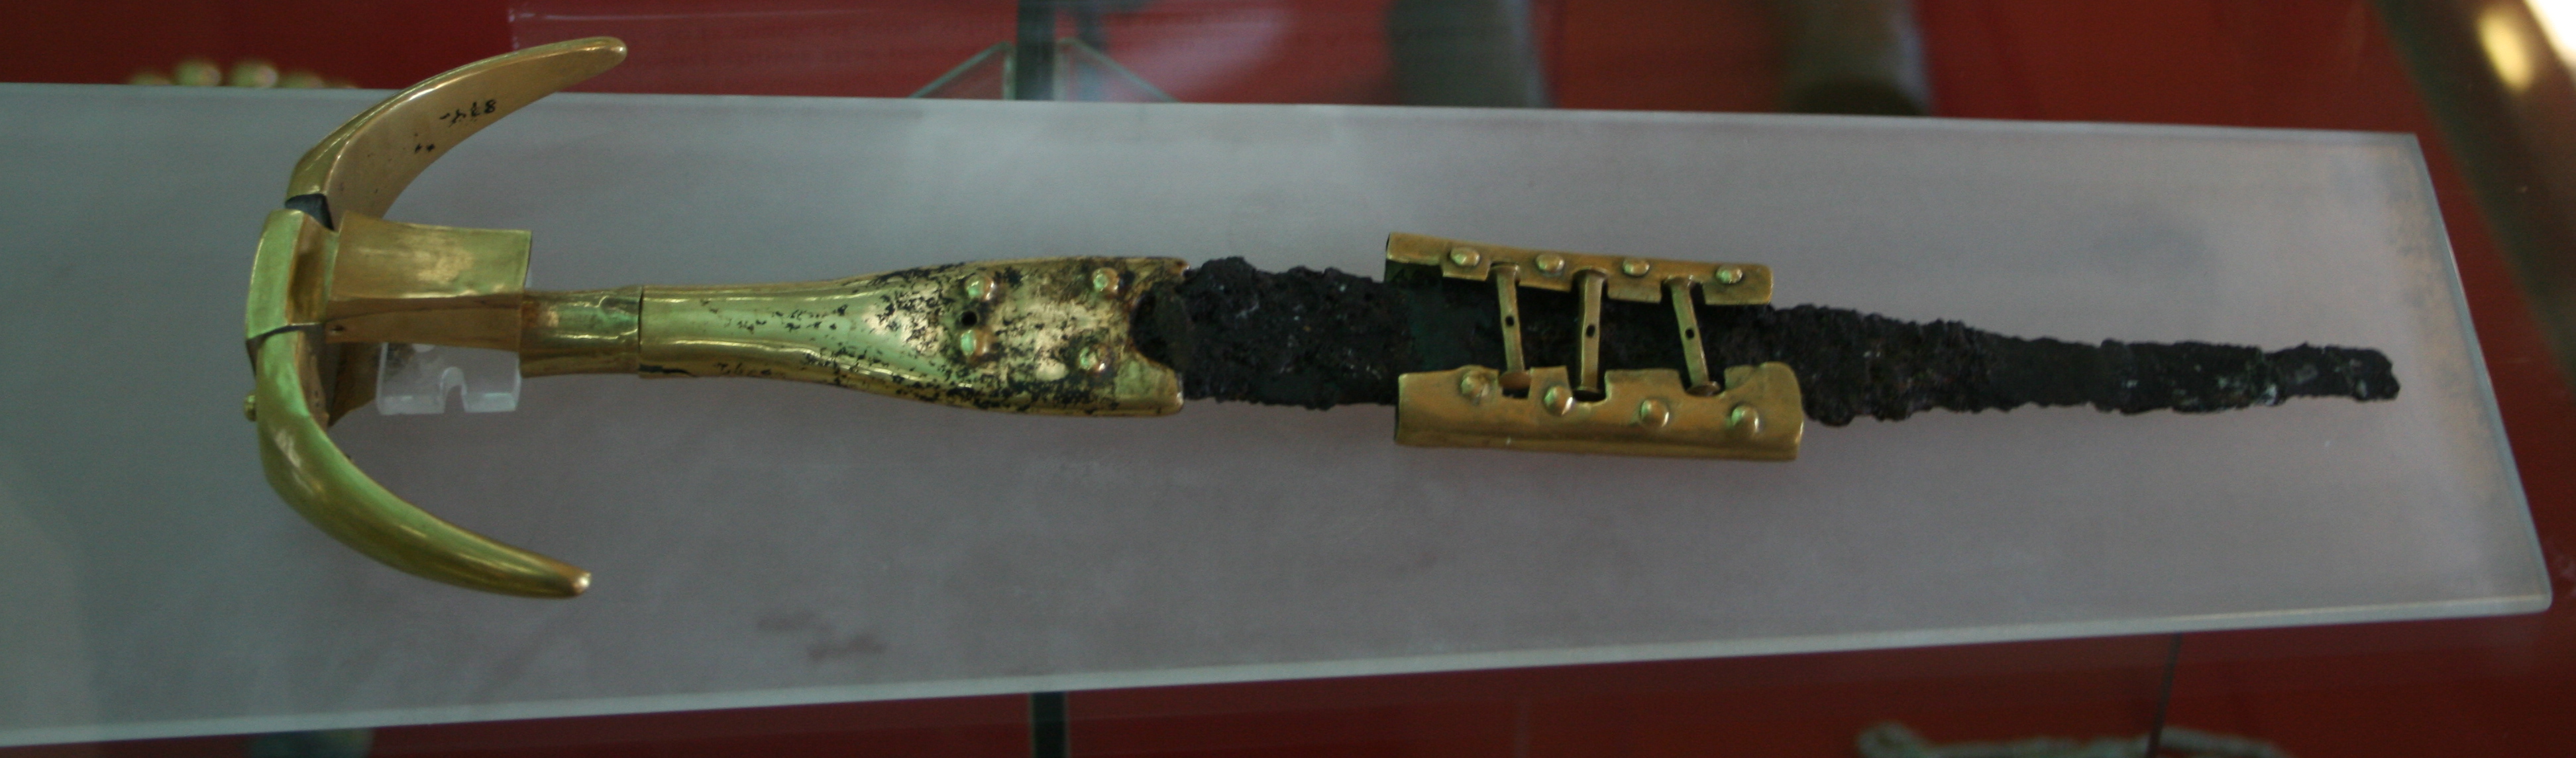 Image of dagger with gold base and iron blade from Museum of Anatolian Civilizations